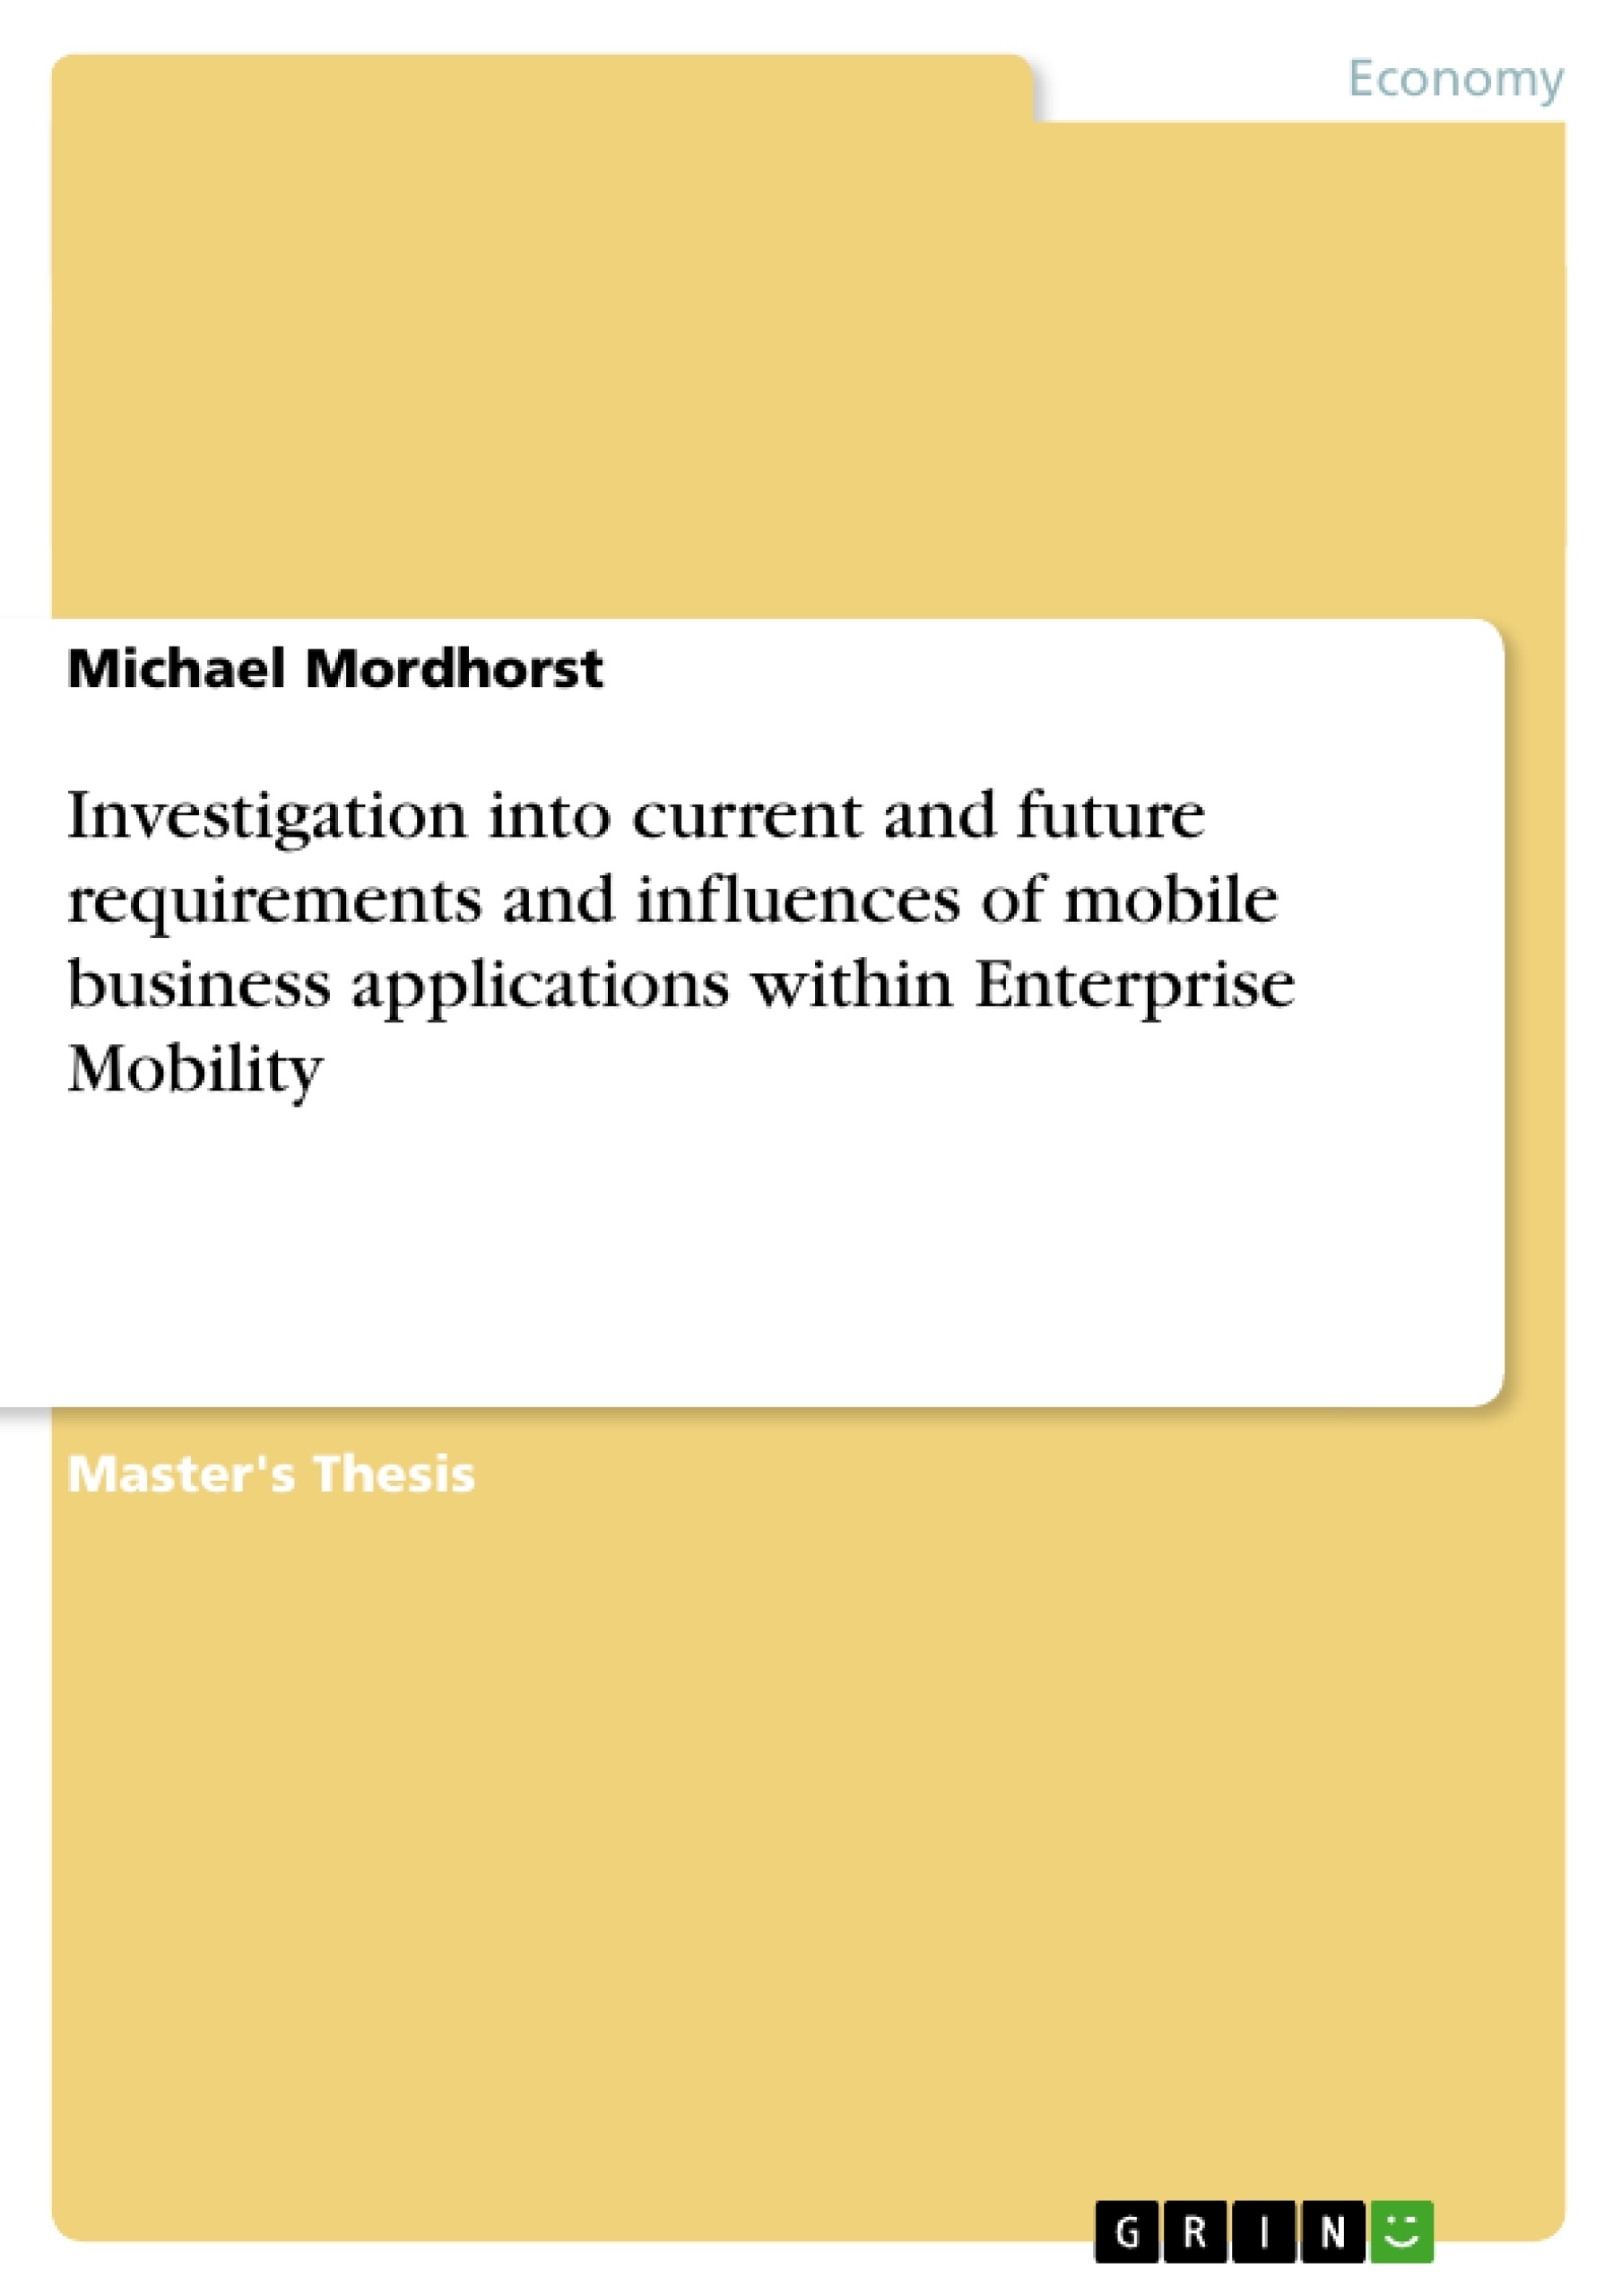 Title: Investigation into current and future requirements and influences of mobile business applications within Enterprise Mobility